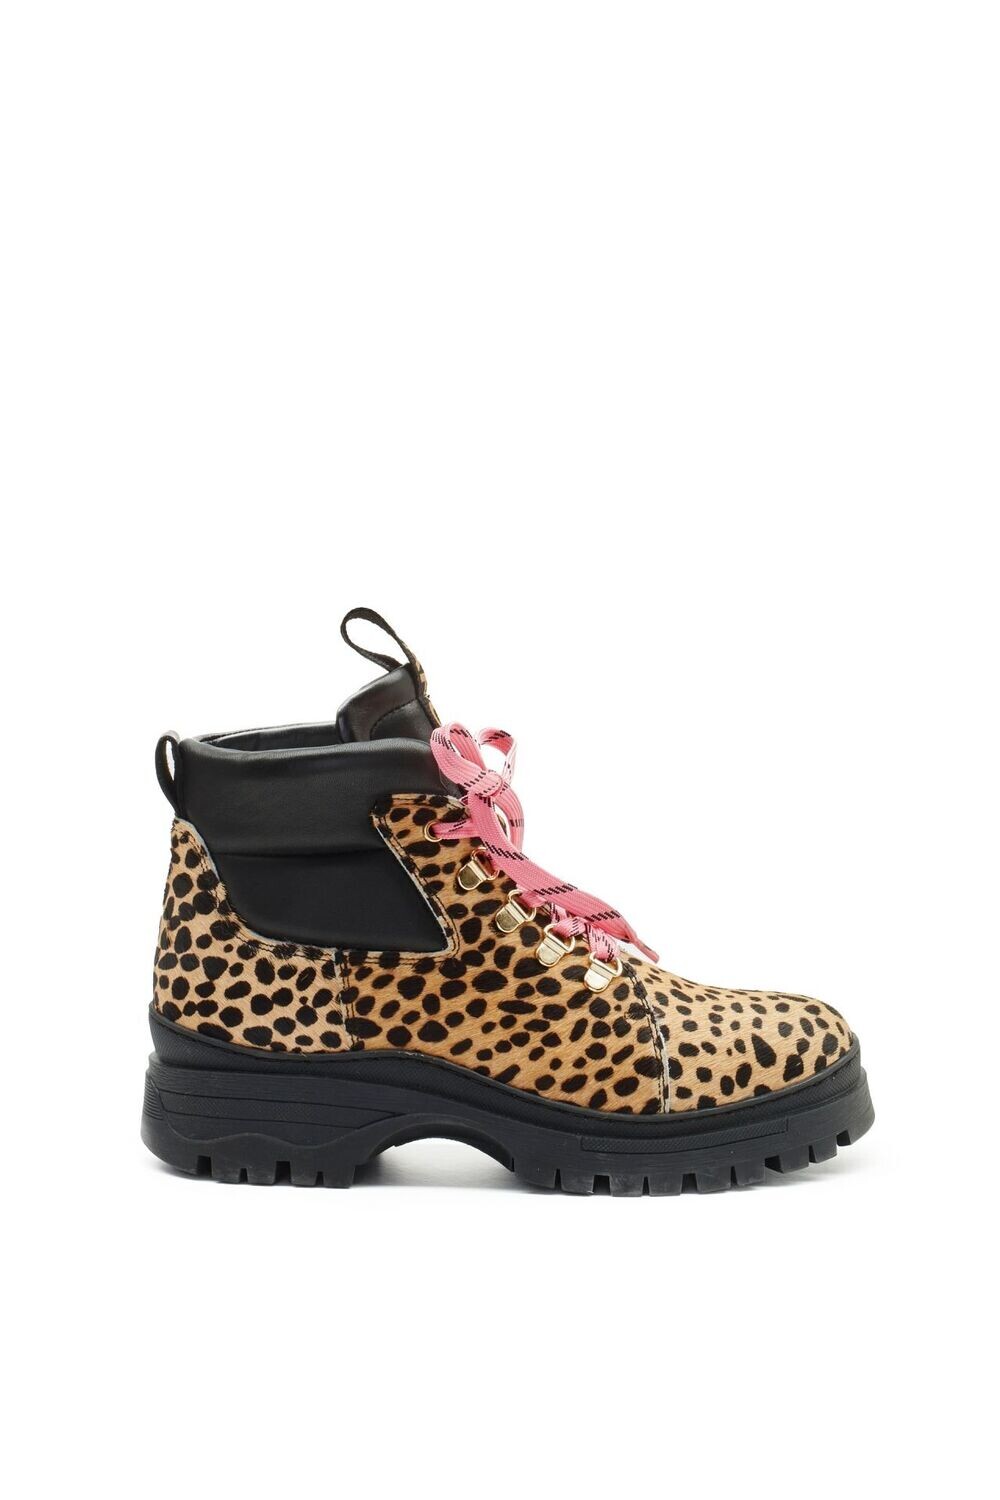 fabienne-chapot-leopard-printed-lindsey-boots